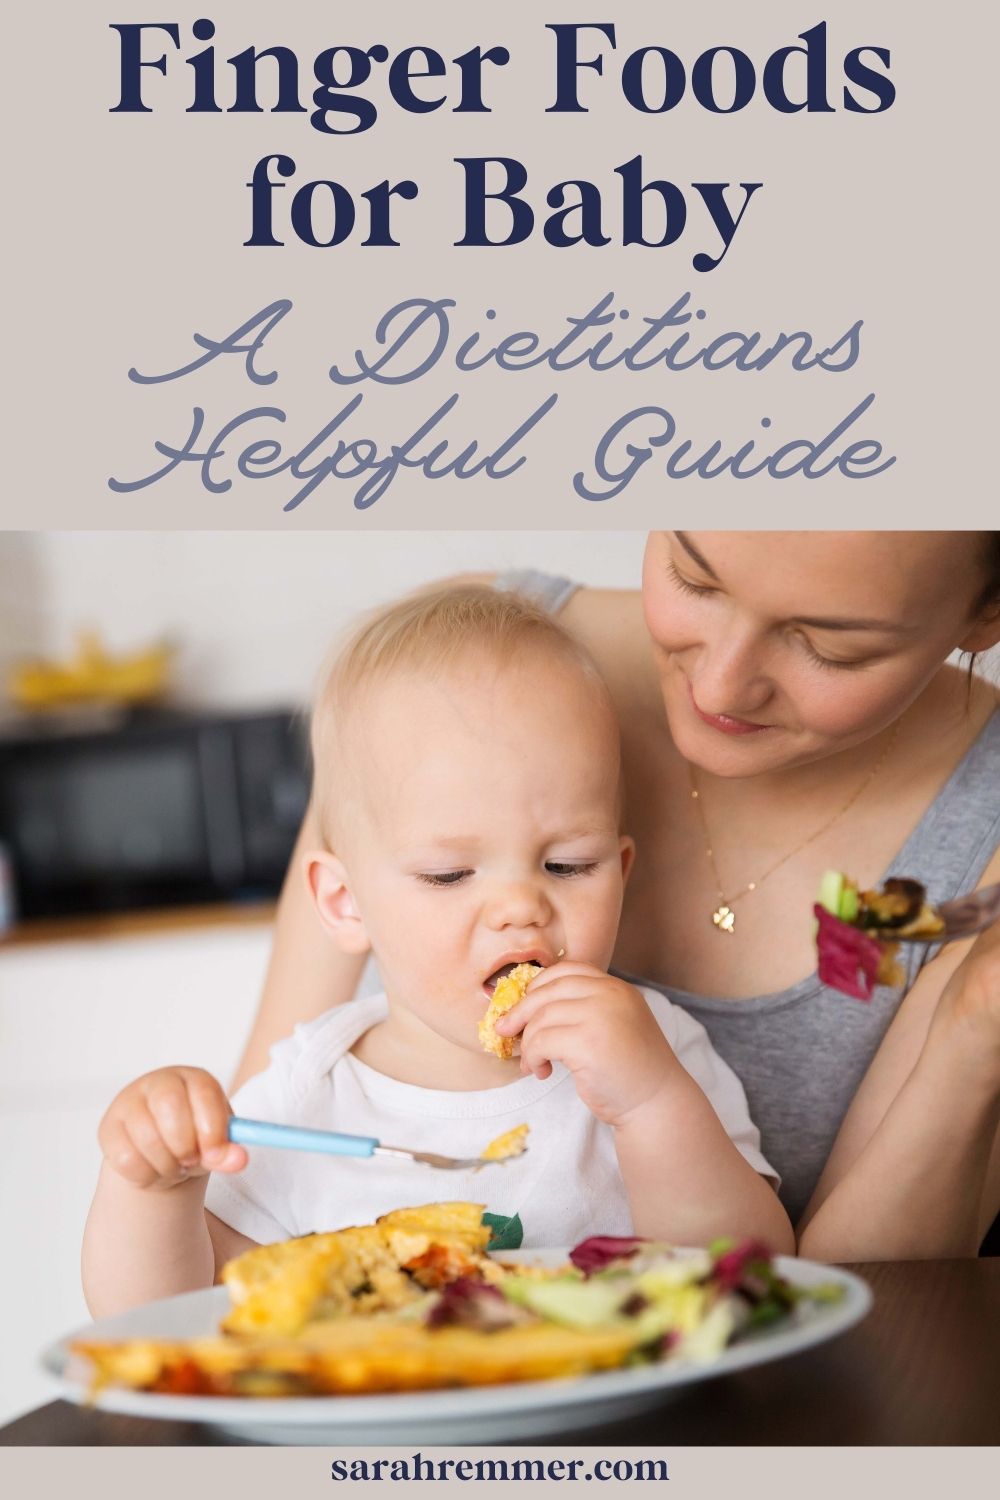 https://www.sarahremmer.com/wp-content/uploads/2019/01/Finger-Food-for-Baby-A-Dietitians-Helpful-Guide.jpg